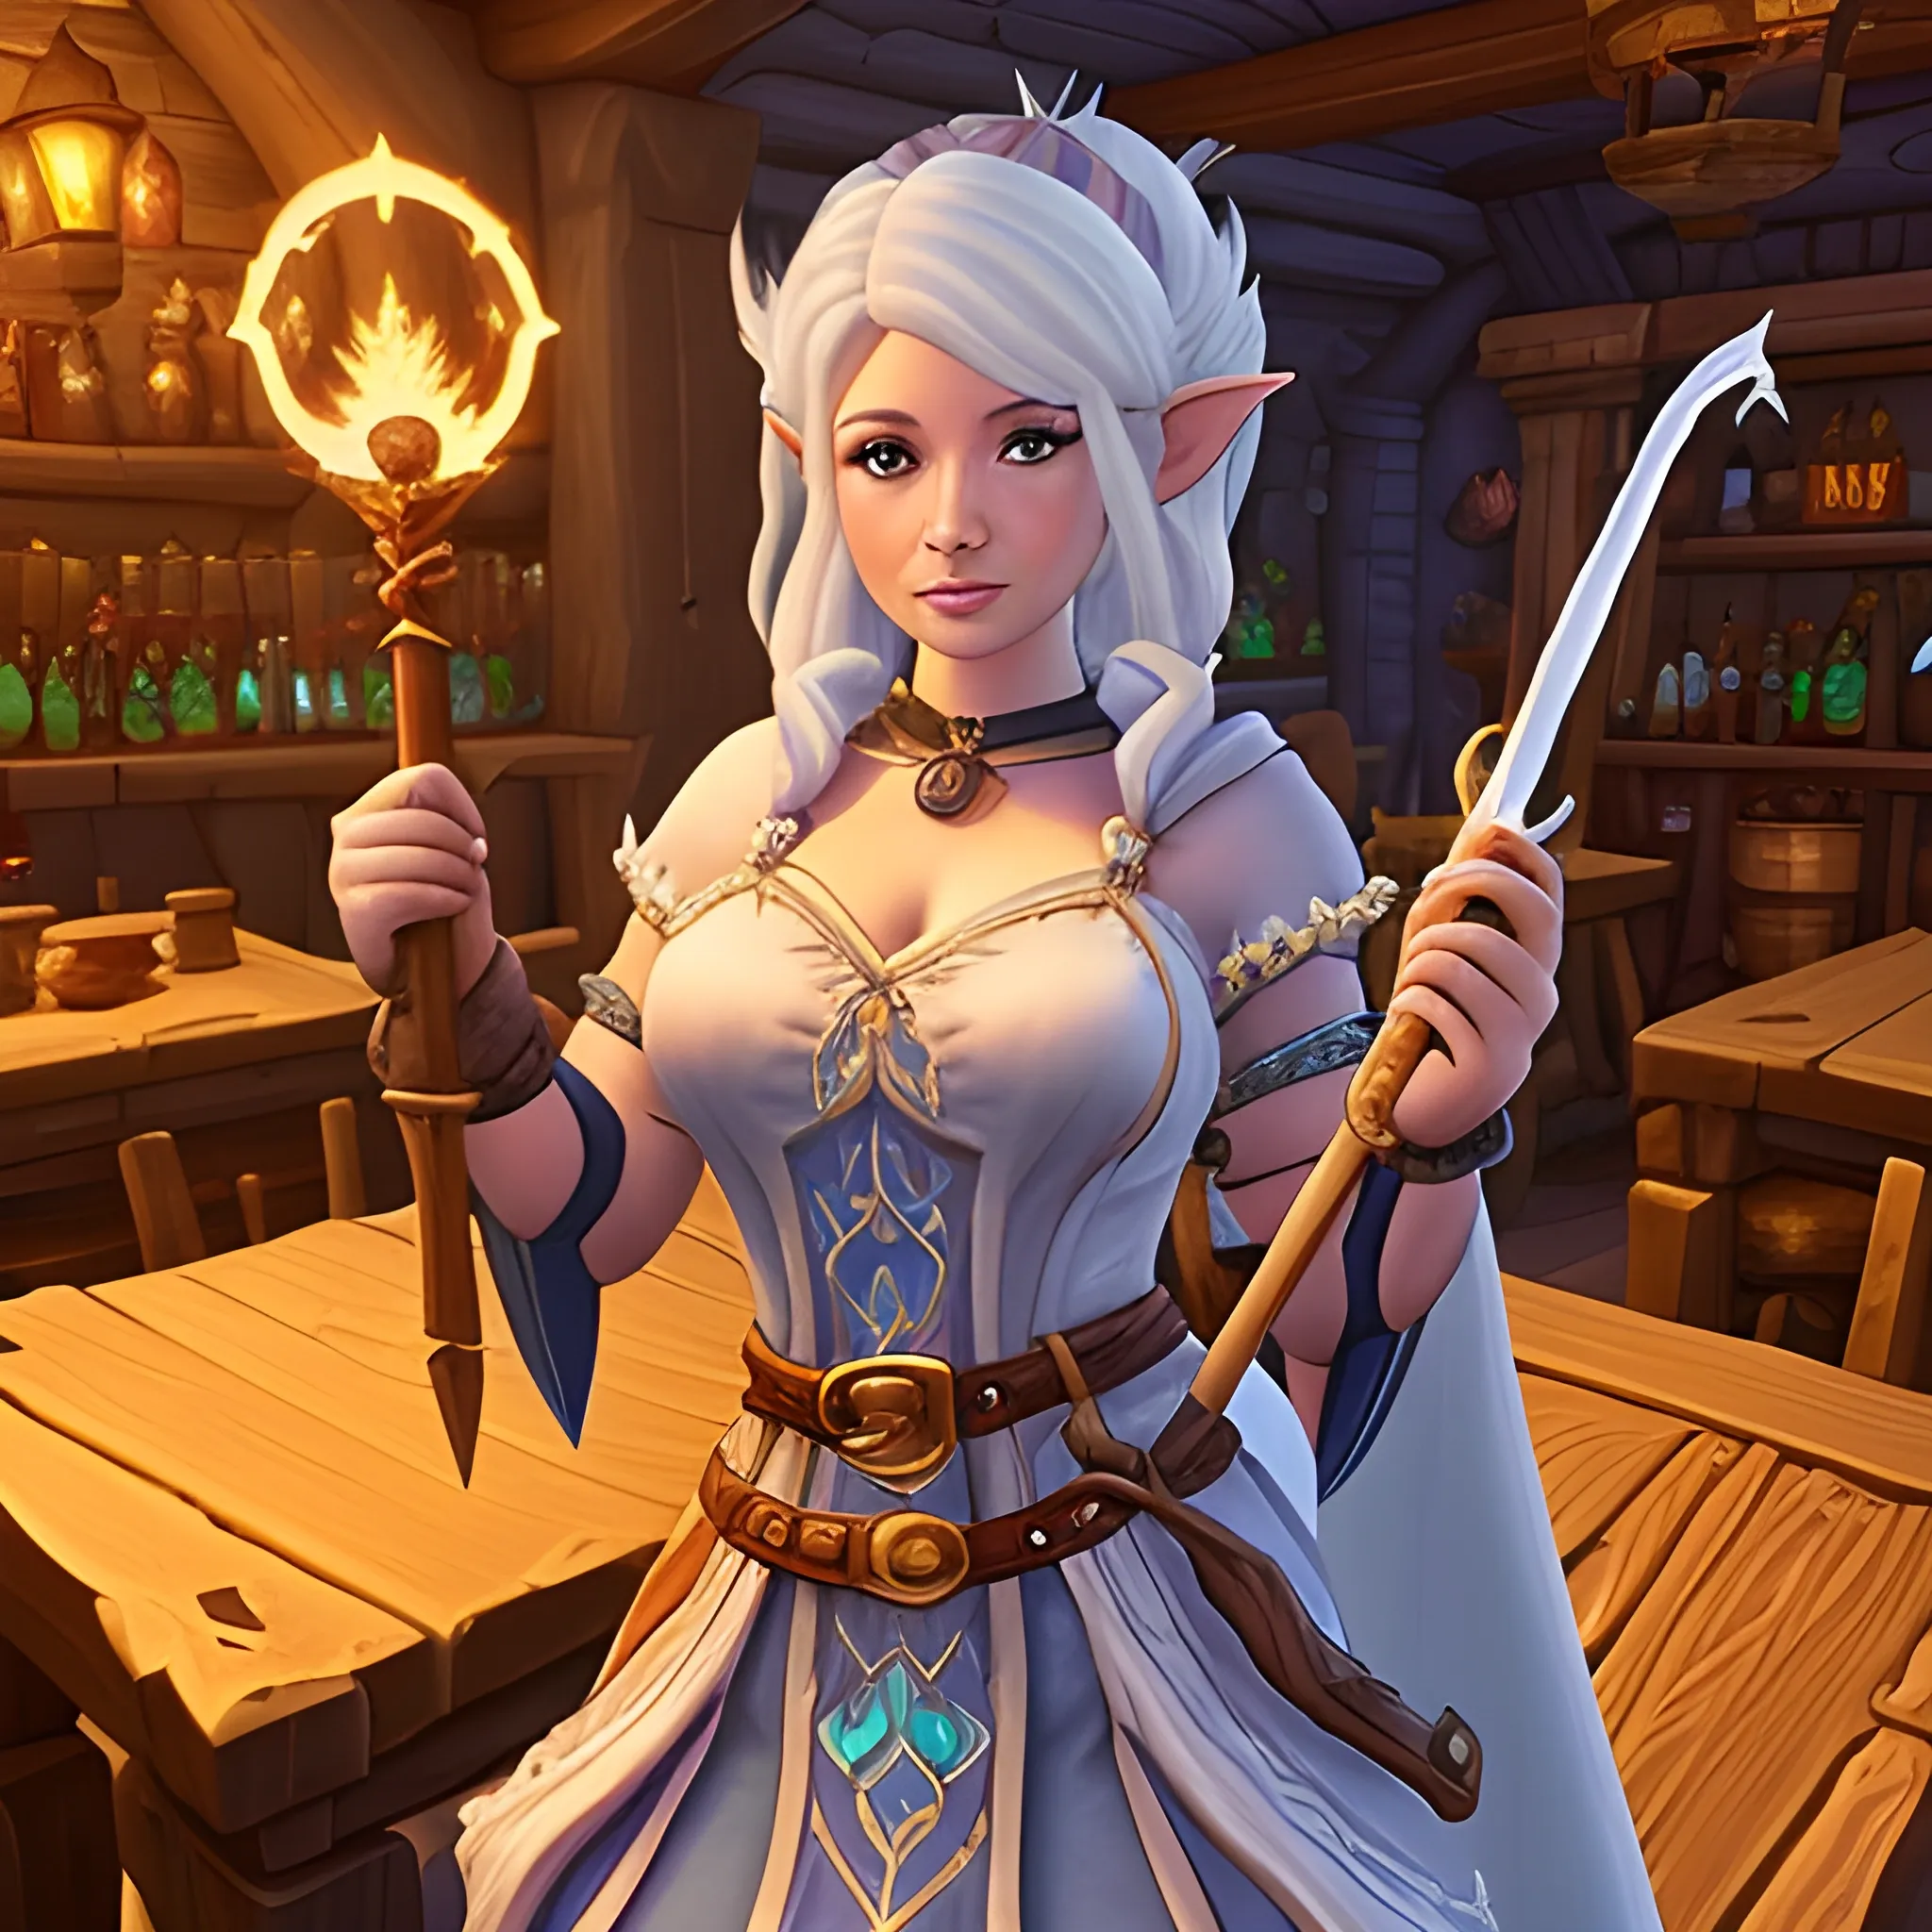 A digital art image of a female Gnome mage, approximately 30 years old, in a World of Warcraft tavern, inspired by Rebecca Ferguson's appearance, with white hair styled in bunches and holding a long magical staff. The Gnome mage, who looks about 30 years old, has white hair in playful bunches and wears a fantasy-style robe with a white leather bodice. She holds a long magical staff that radiates mystical energy. The tavern scene is bustling with various fantasy characters, wooden tables, and mystical decorations, creating a vibrant World of Warcraft atmosphere.